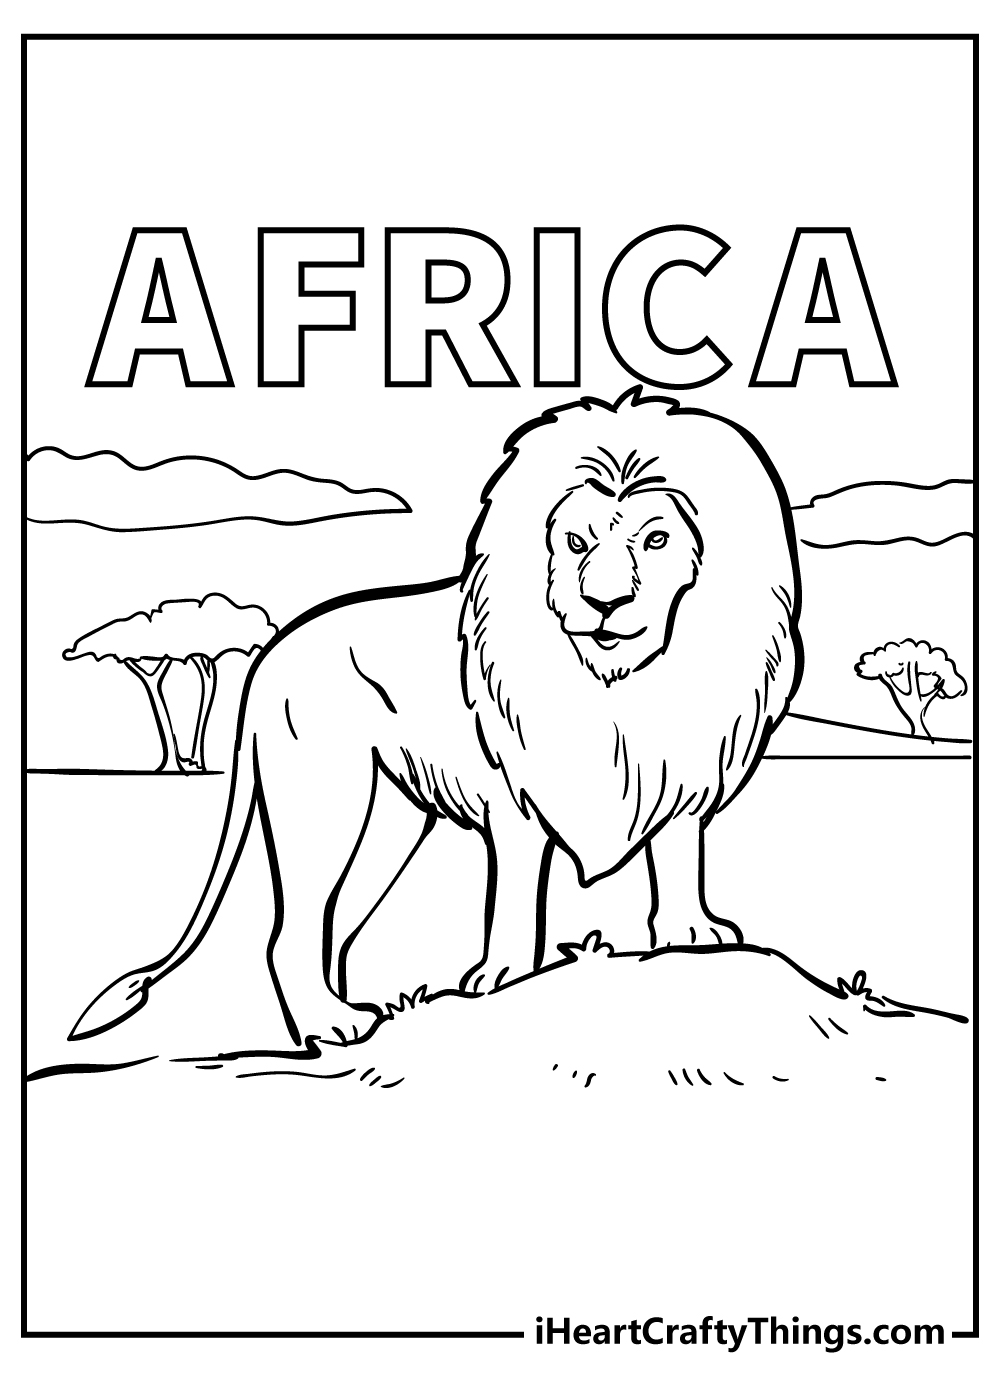 Africa Coloring Sheet for children free download